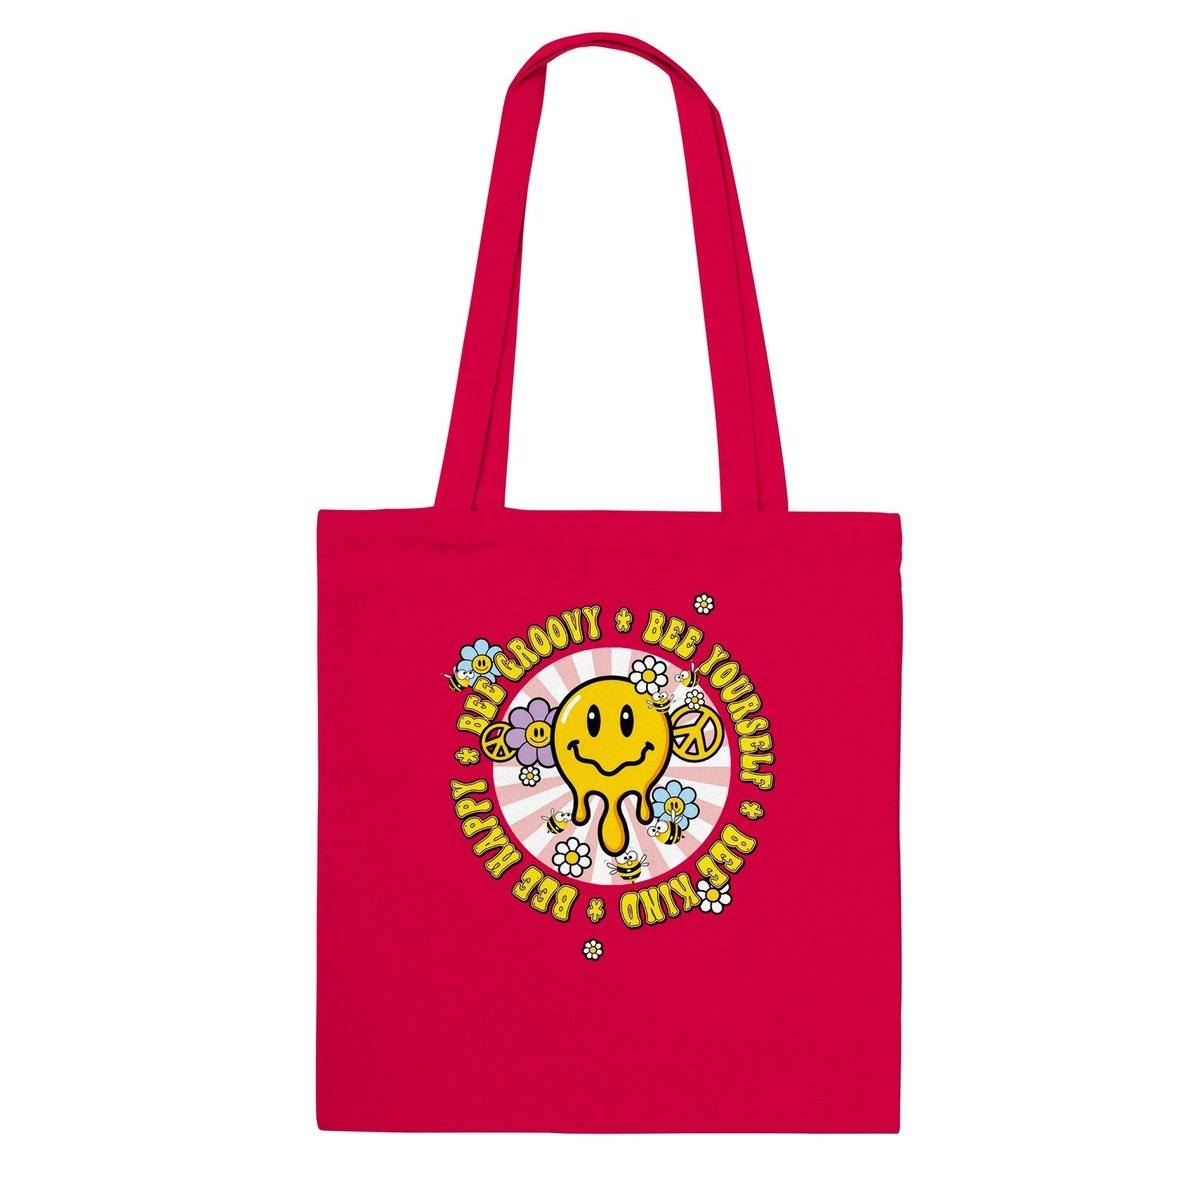 Bee Groovy - Bee Yourself - Bee Kind  - Classic Tote Bag Tote Bag Red BC Australia